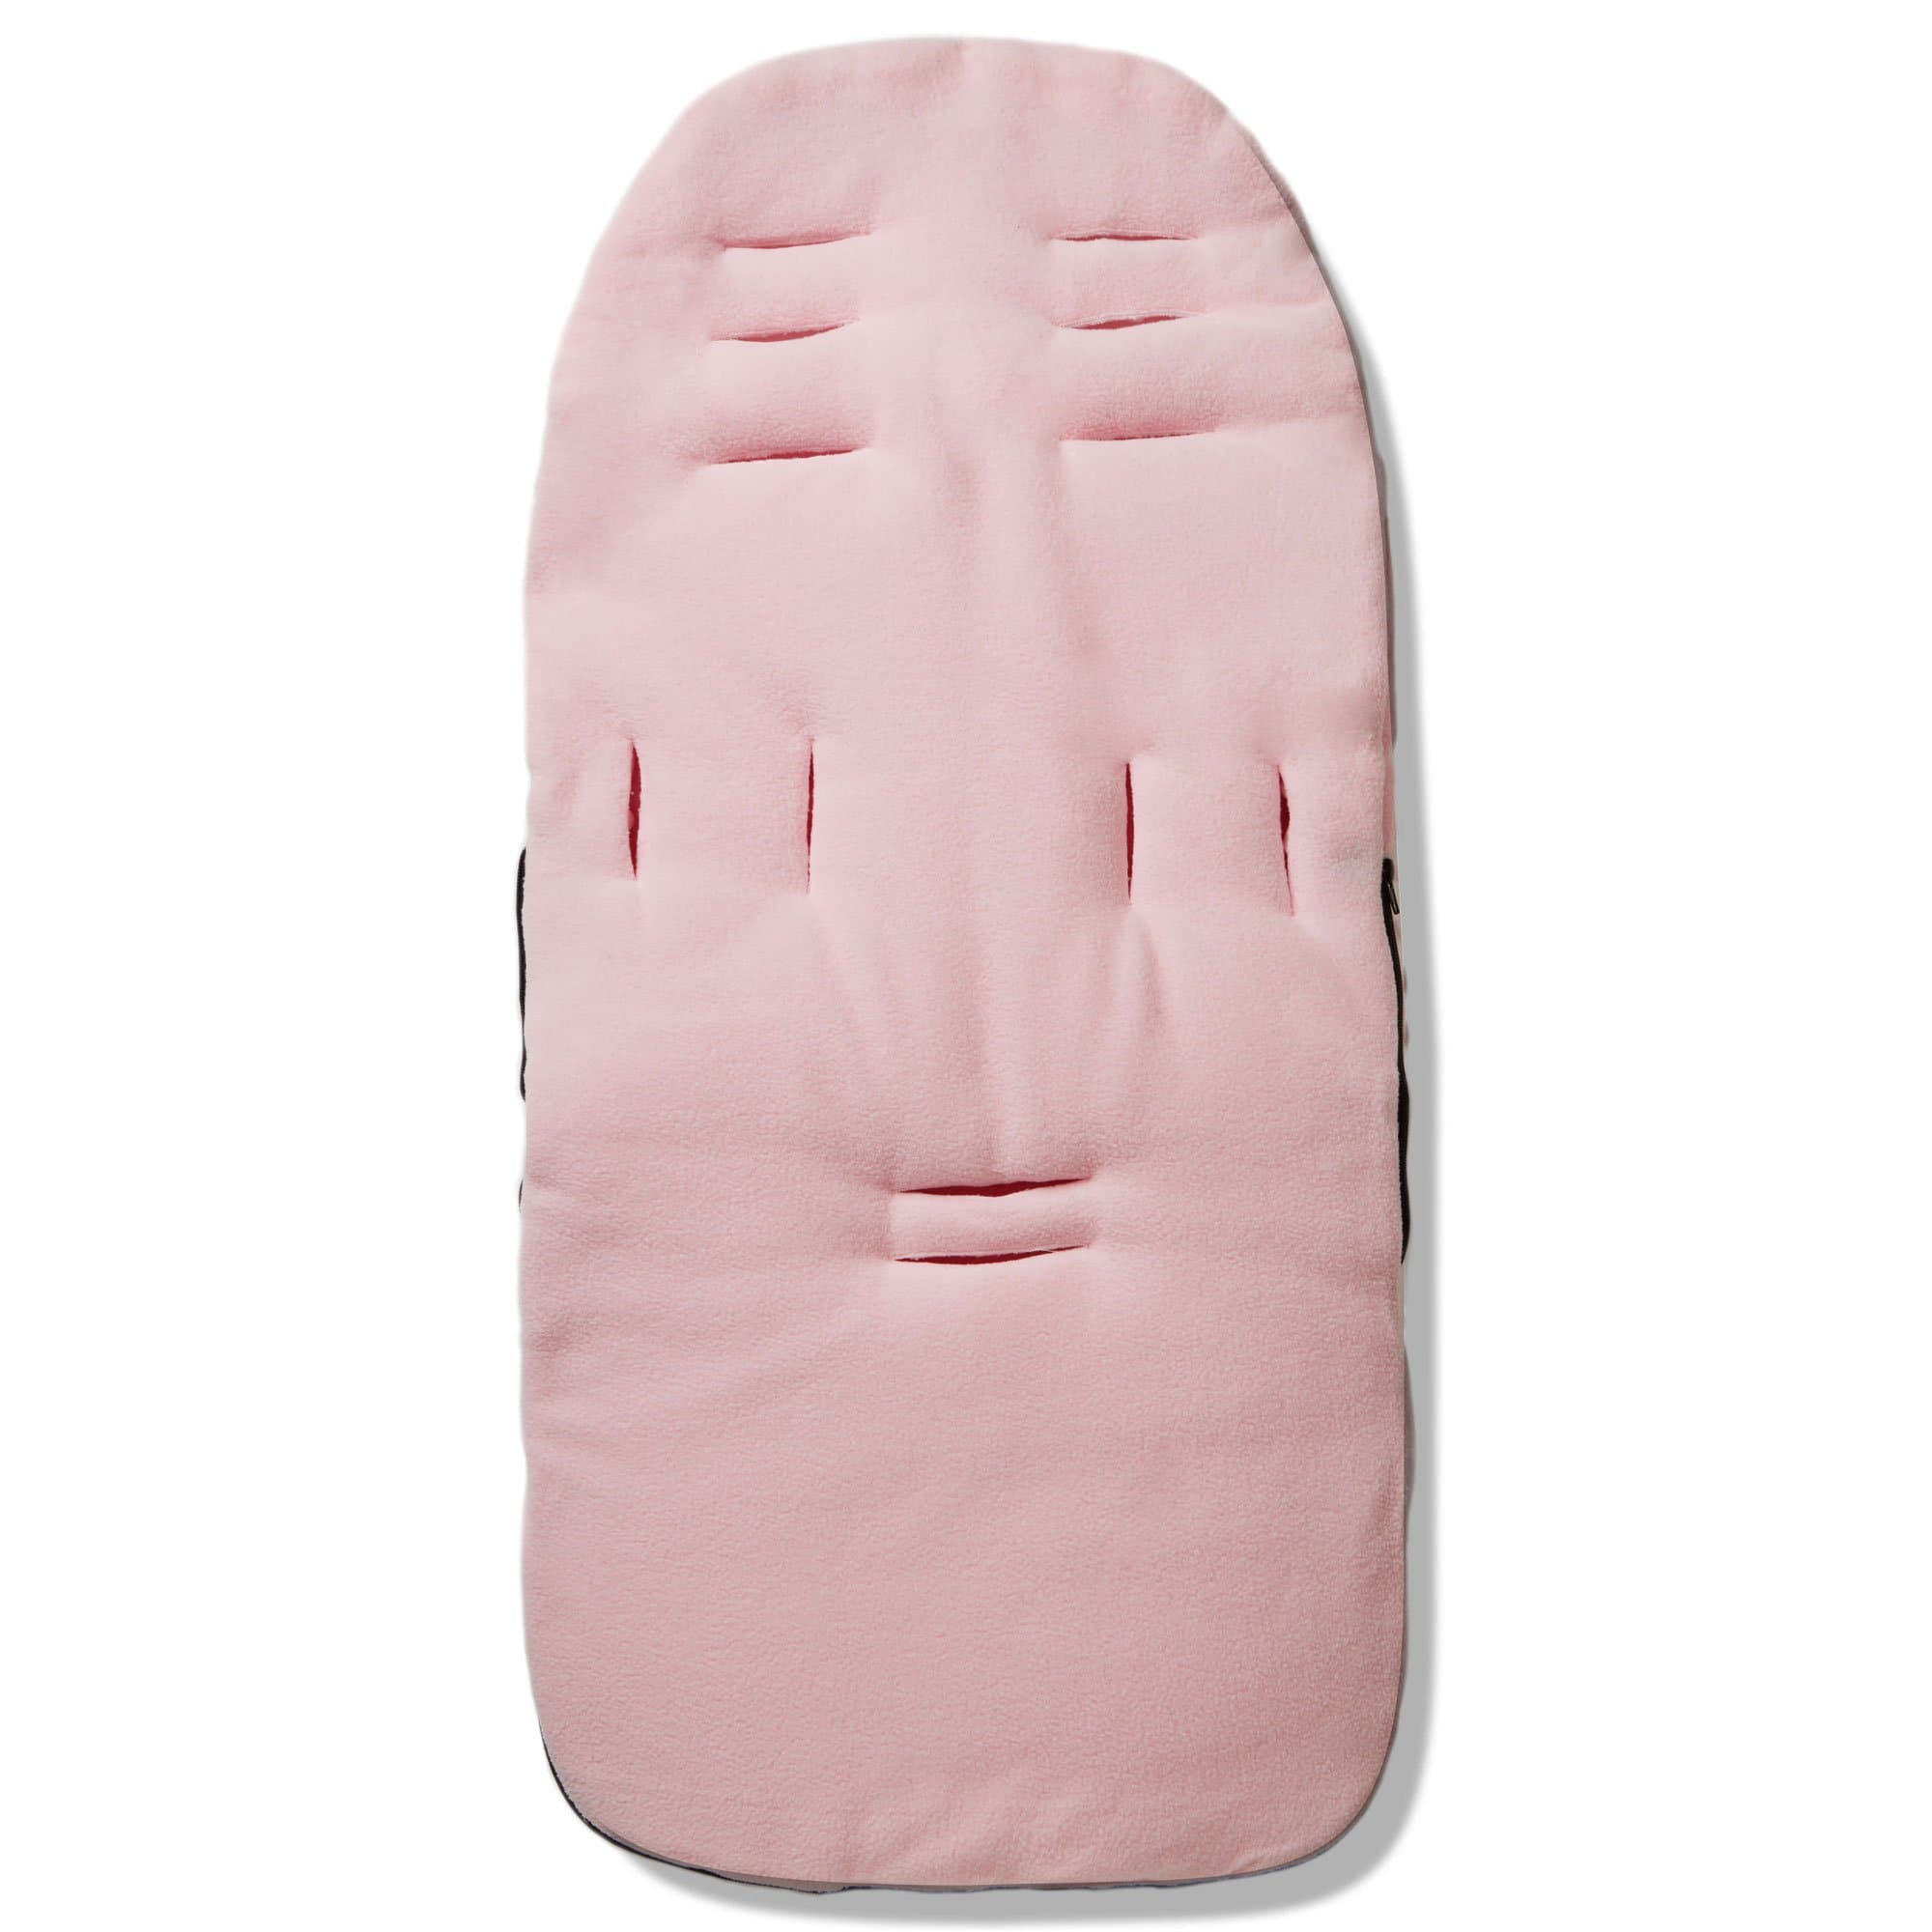 Dimple Footmuff / Cosy Toes Compatible with Emmaljunga - For Your Little One